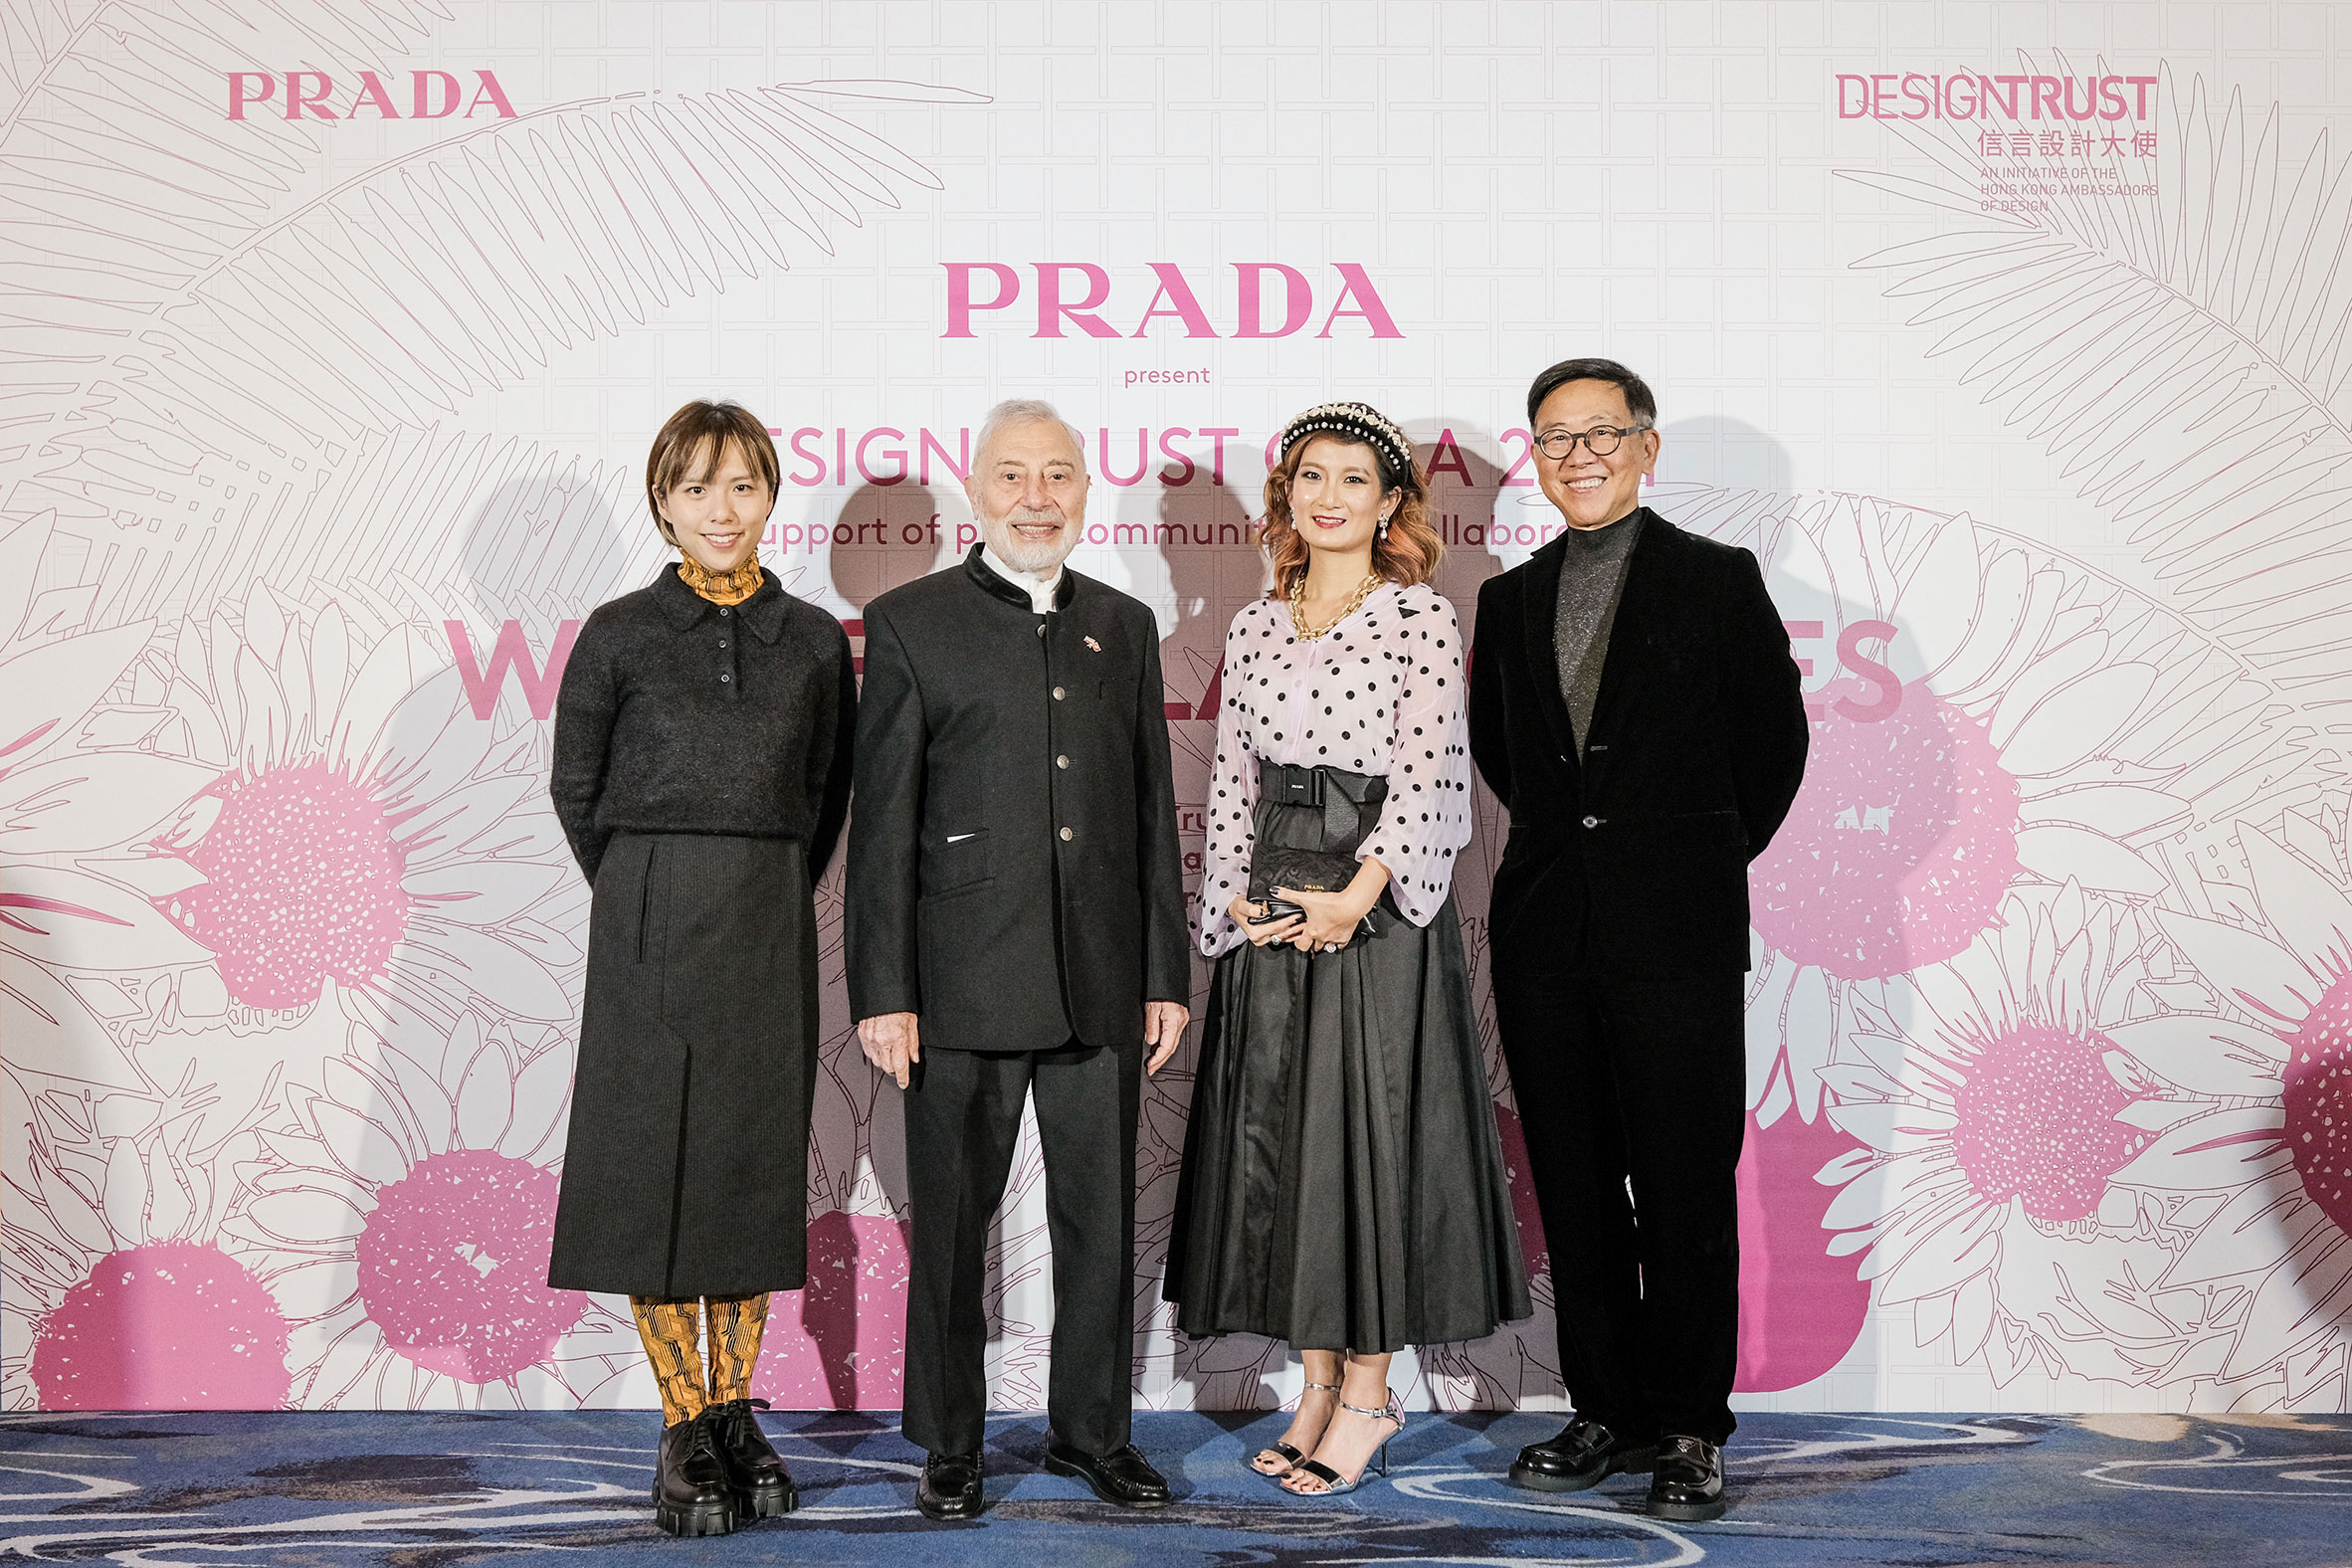 Mak Ying Tung 2, Henry Steine, Elaine Ng and William Lim at the Design Trust Gala 2021